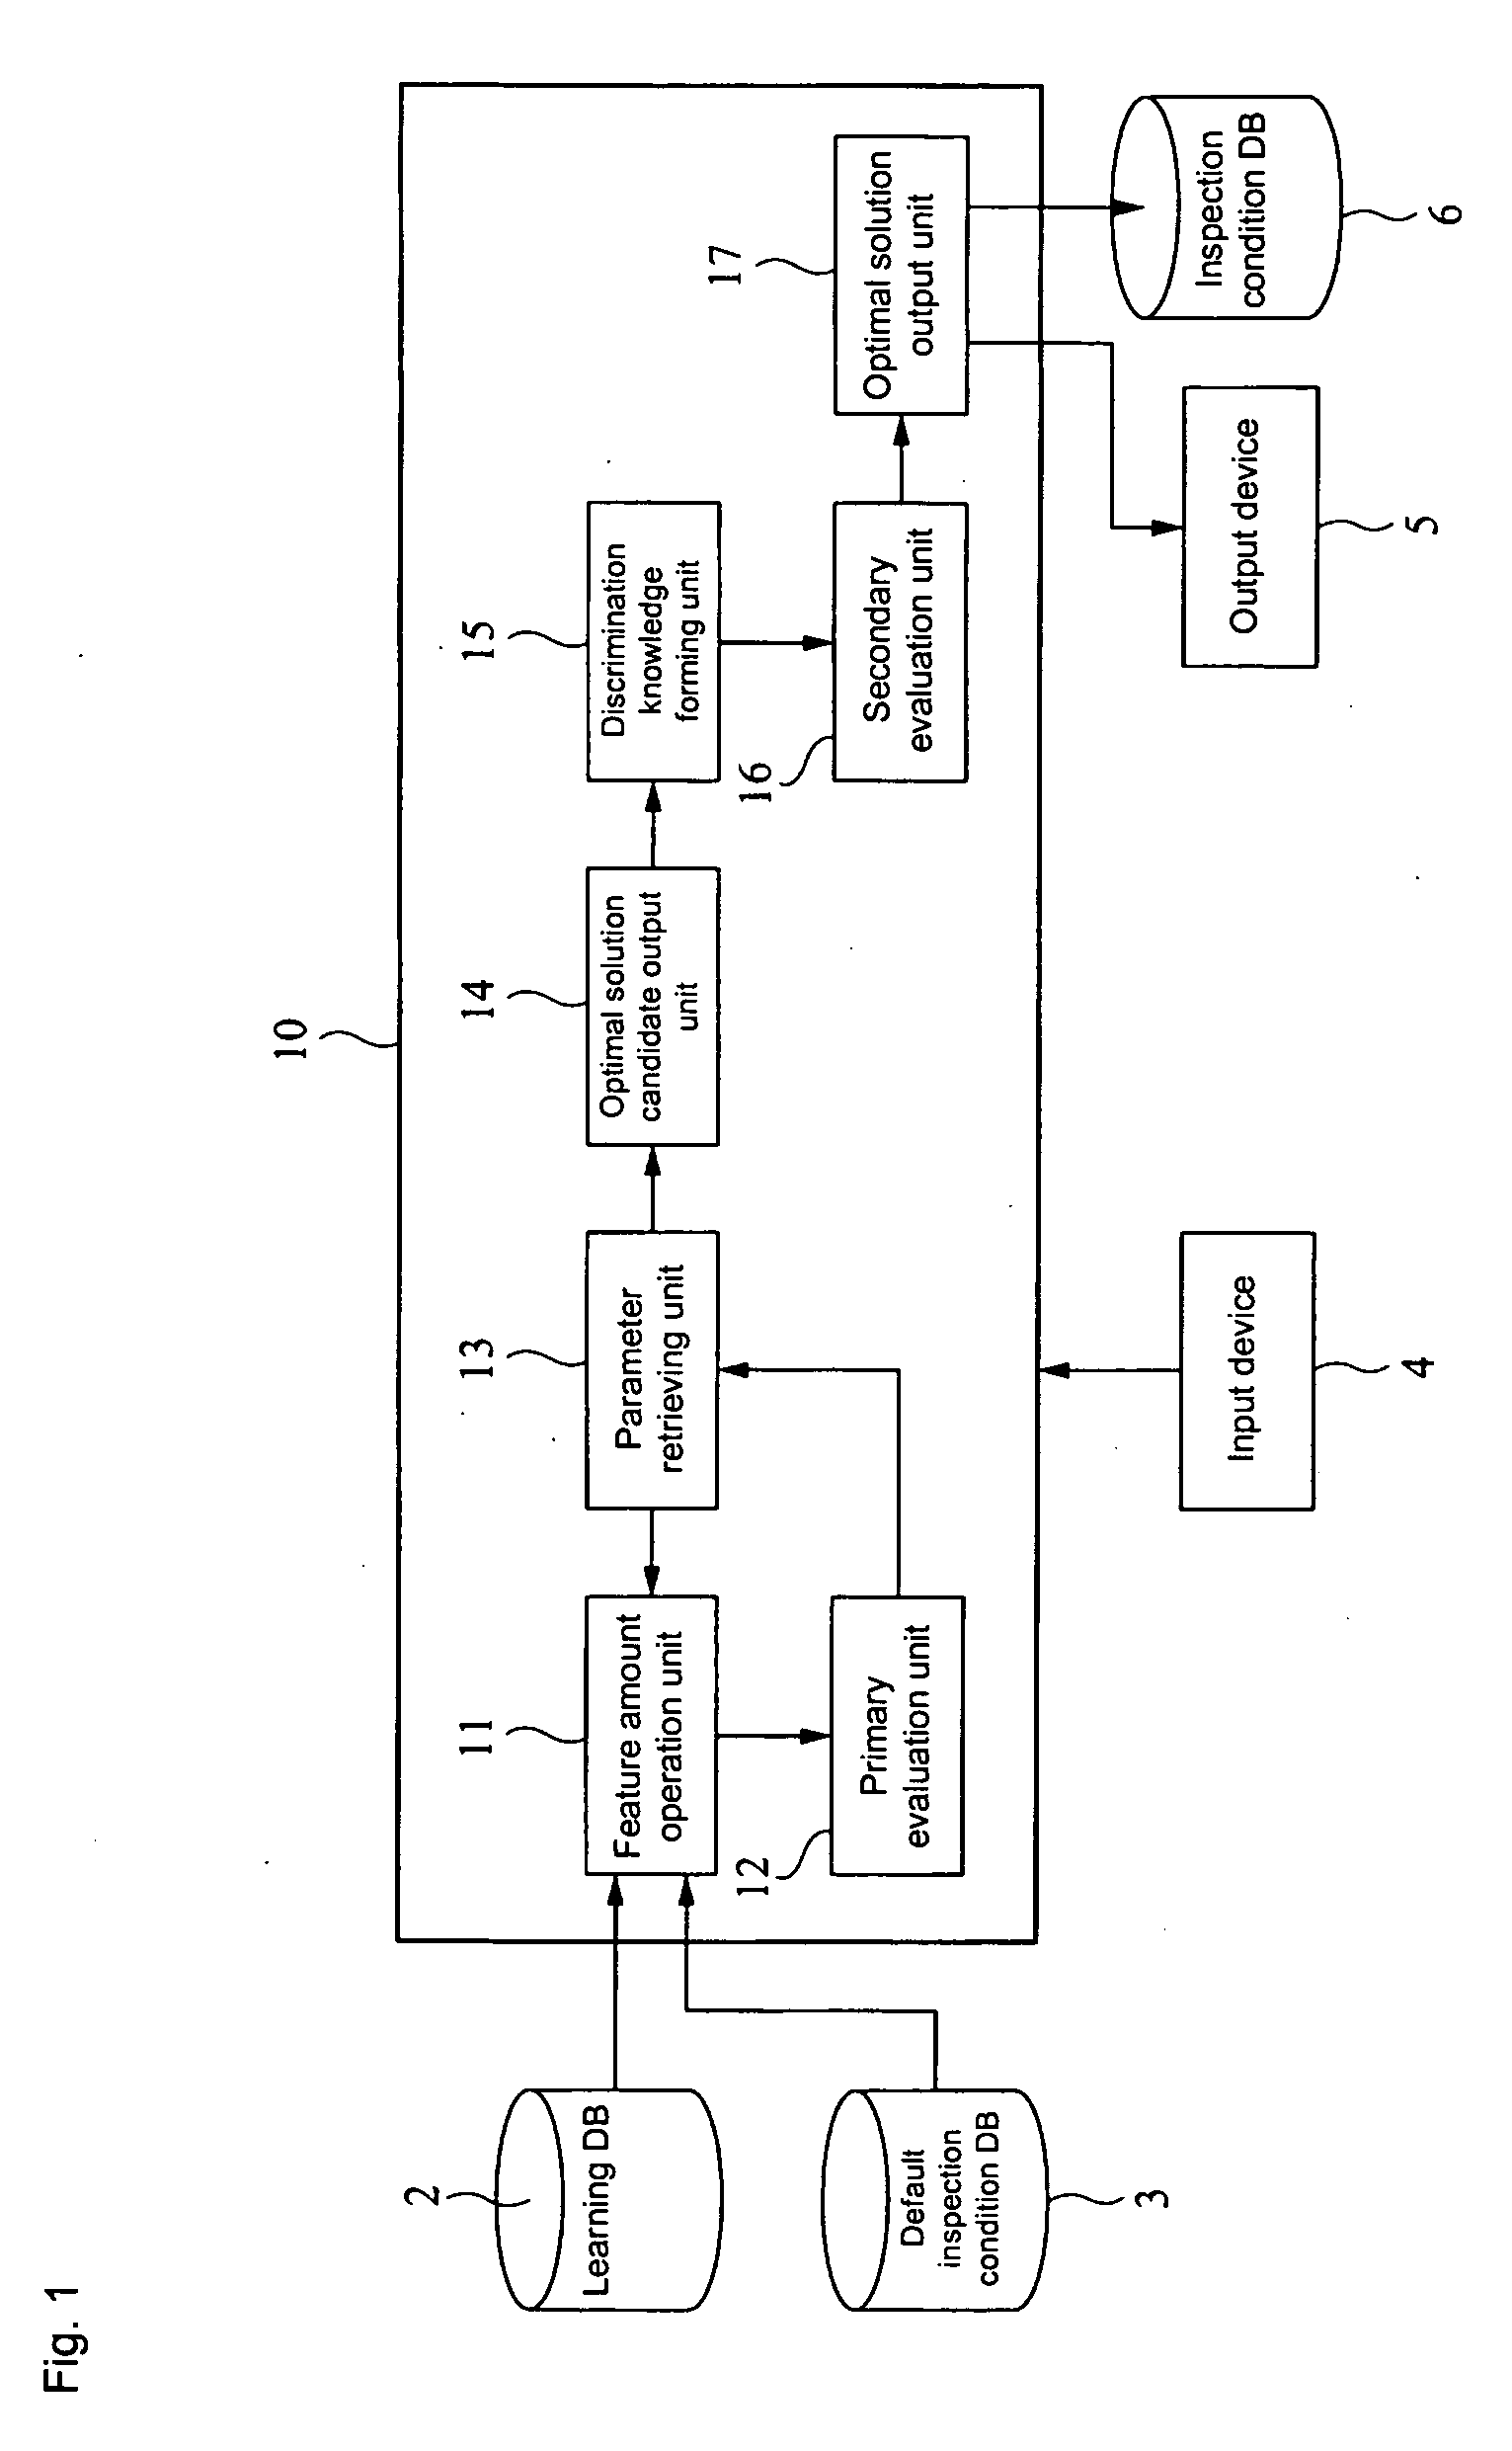 Knowledge-forming apparatus and parameter-retrieving method as well as program product